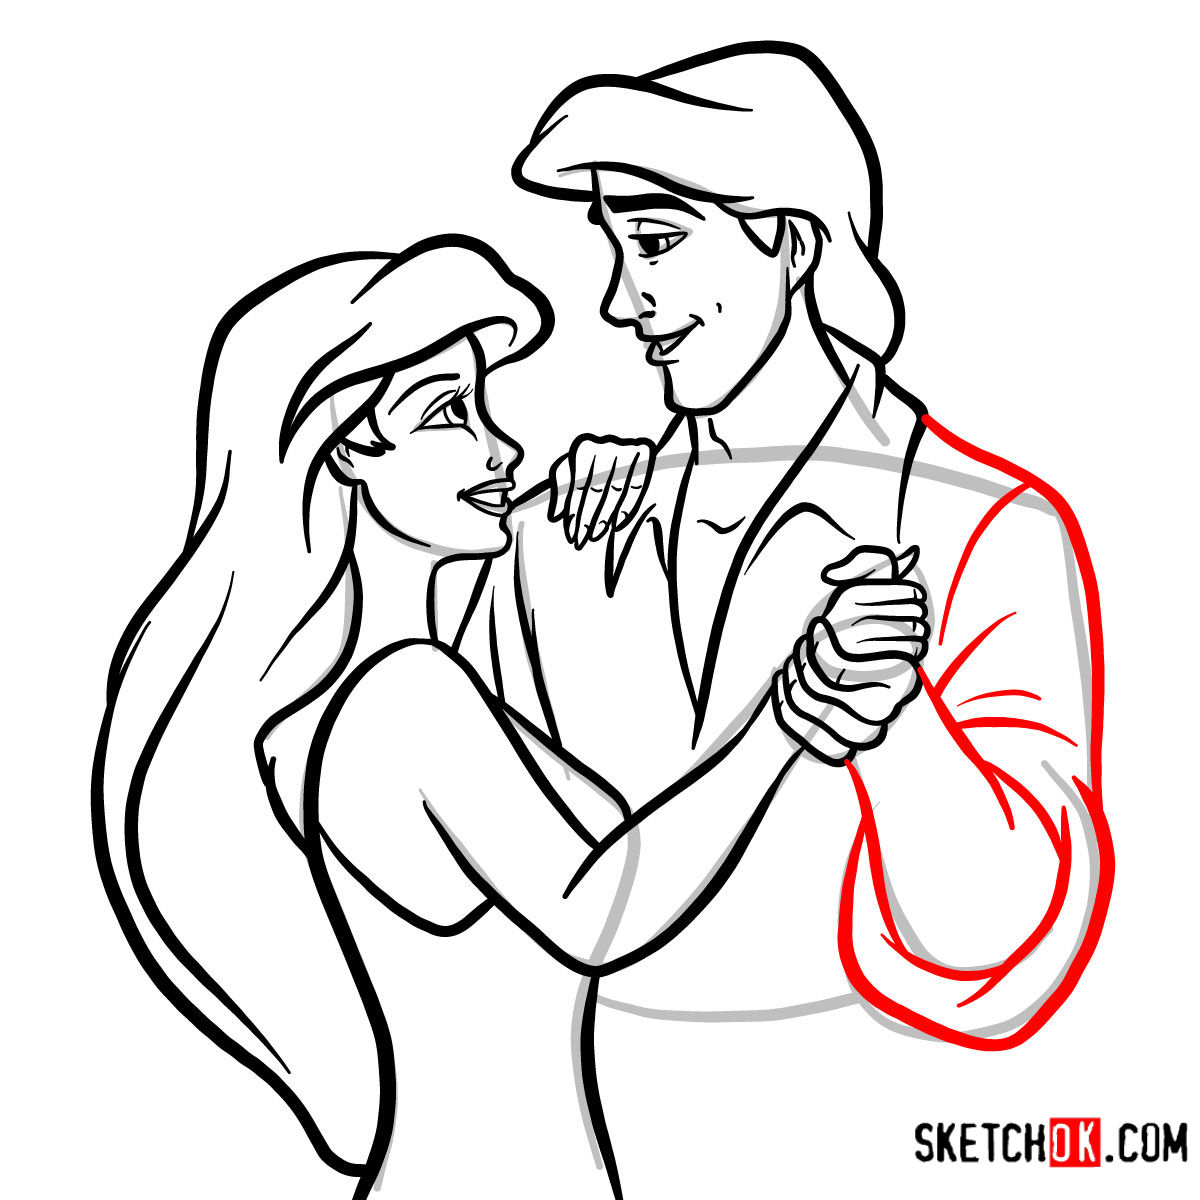 How to draw Eric and Ariel together | The Little Mermaid - step 15